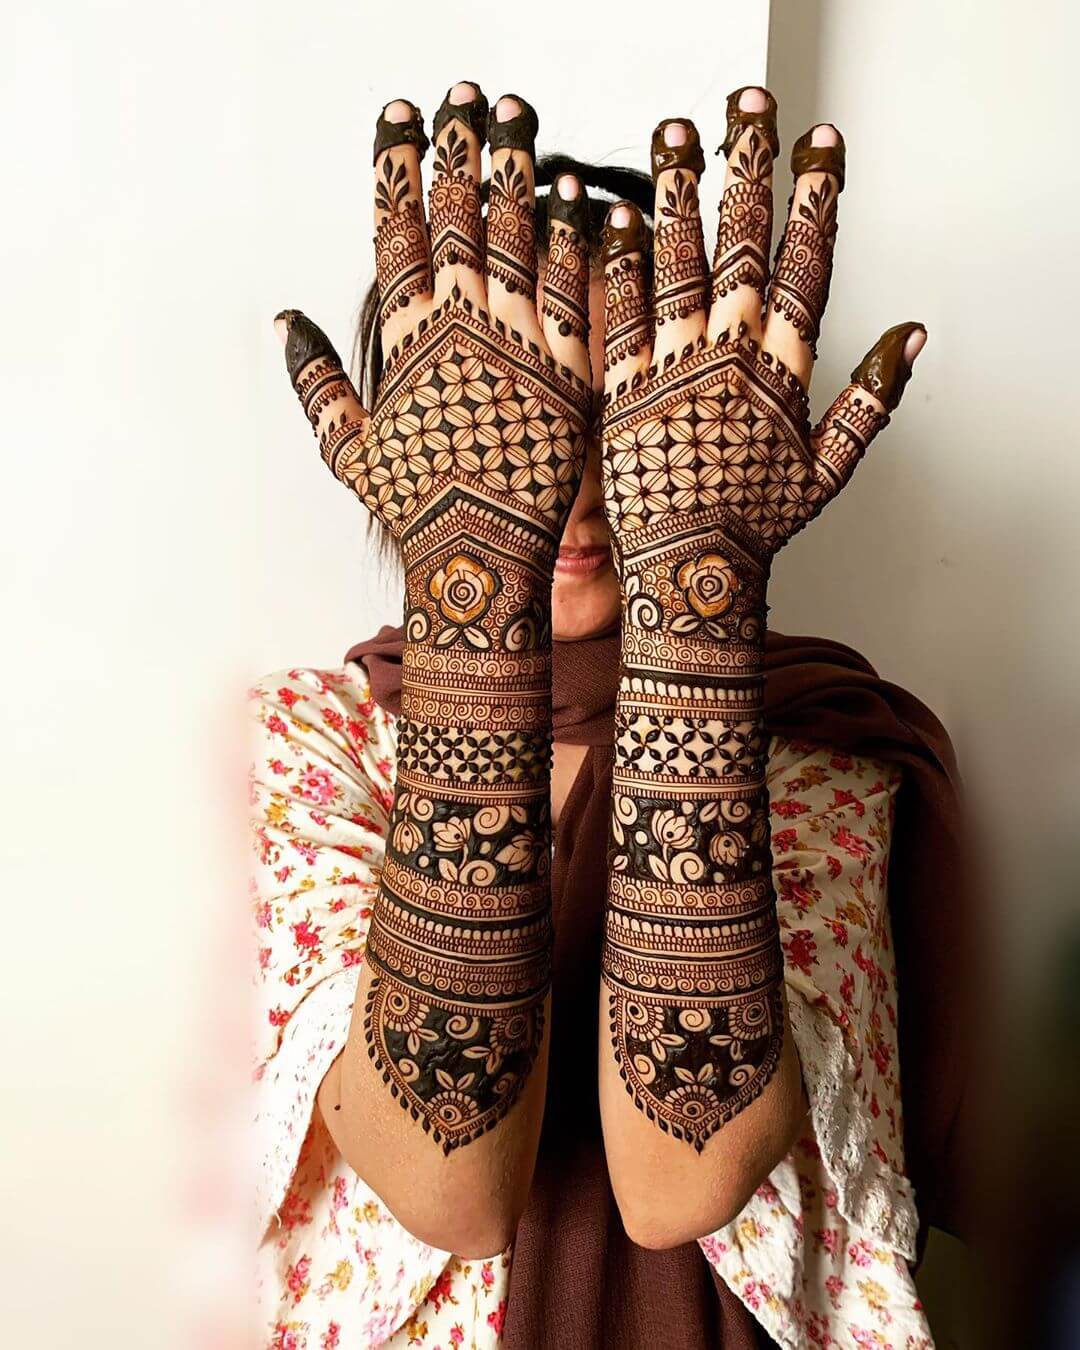 Designs for the bride's mehndi on the palms and backs of her hands.